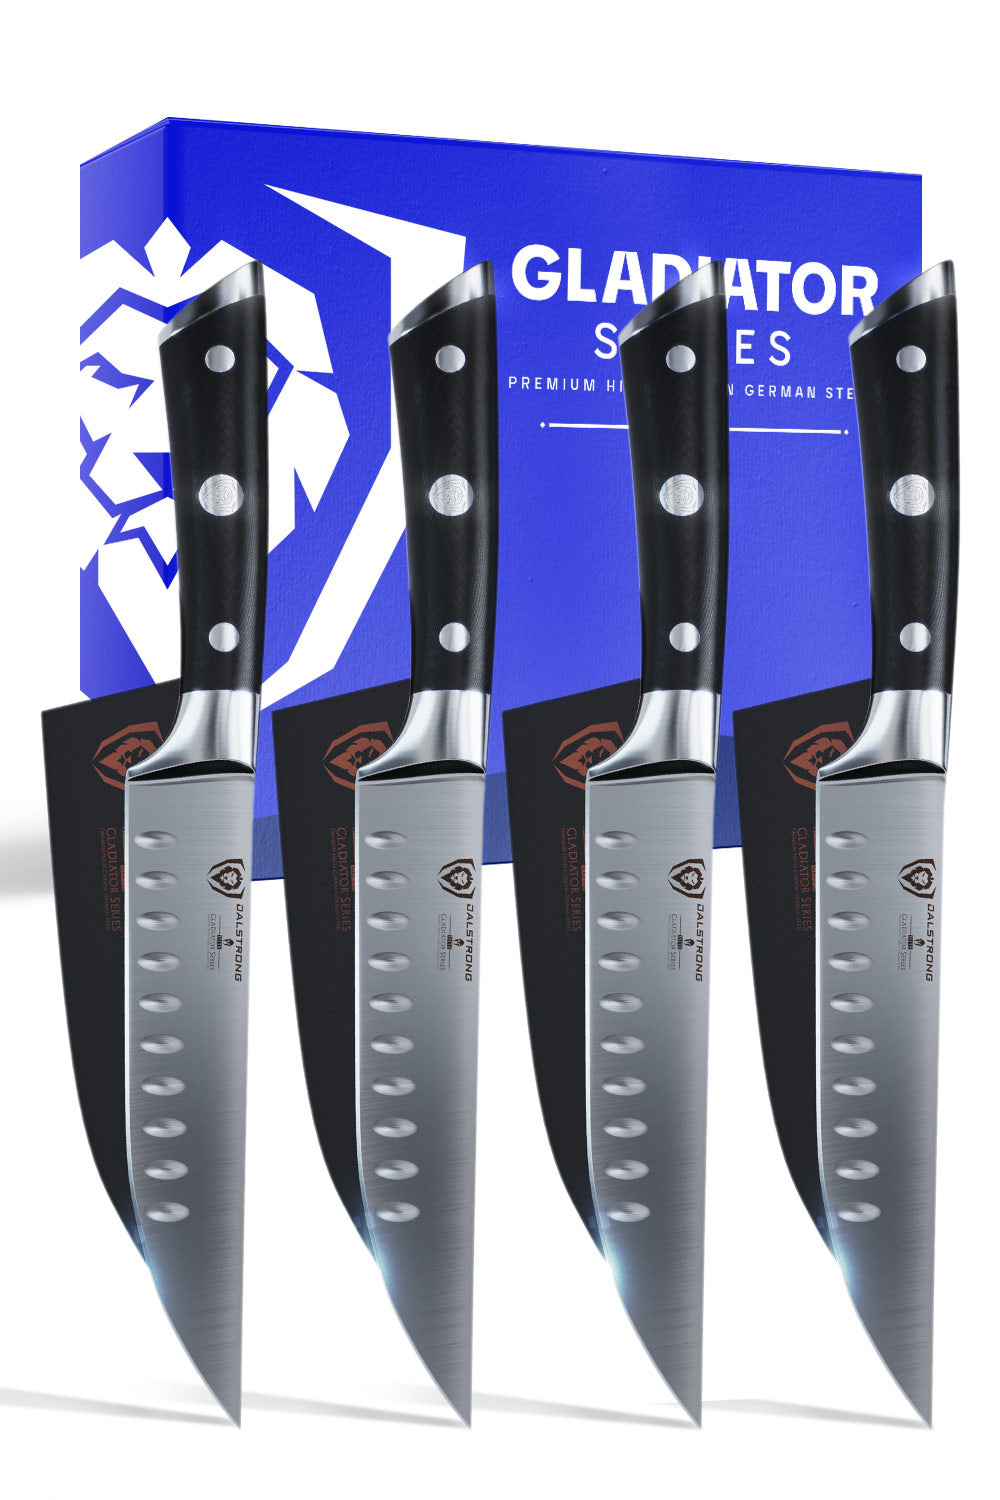 Dalstrong Kitchen & Steak Knives for sale